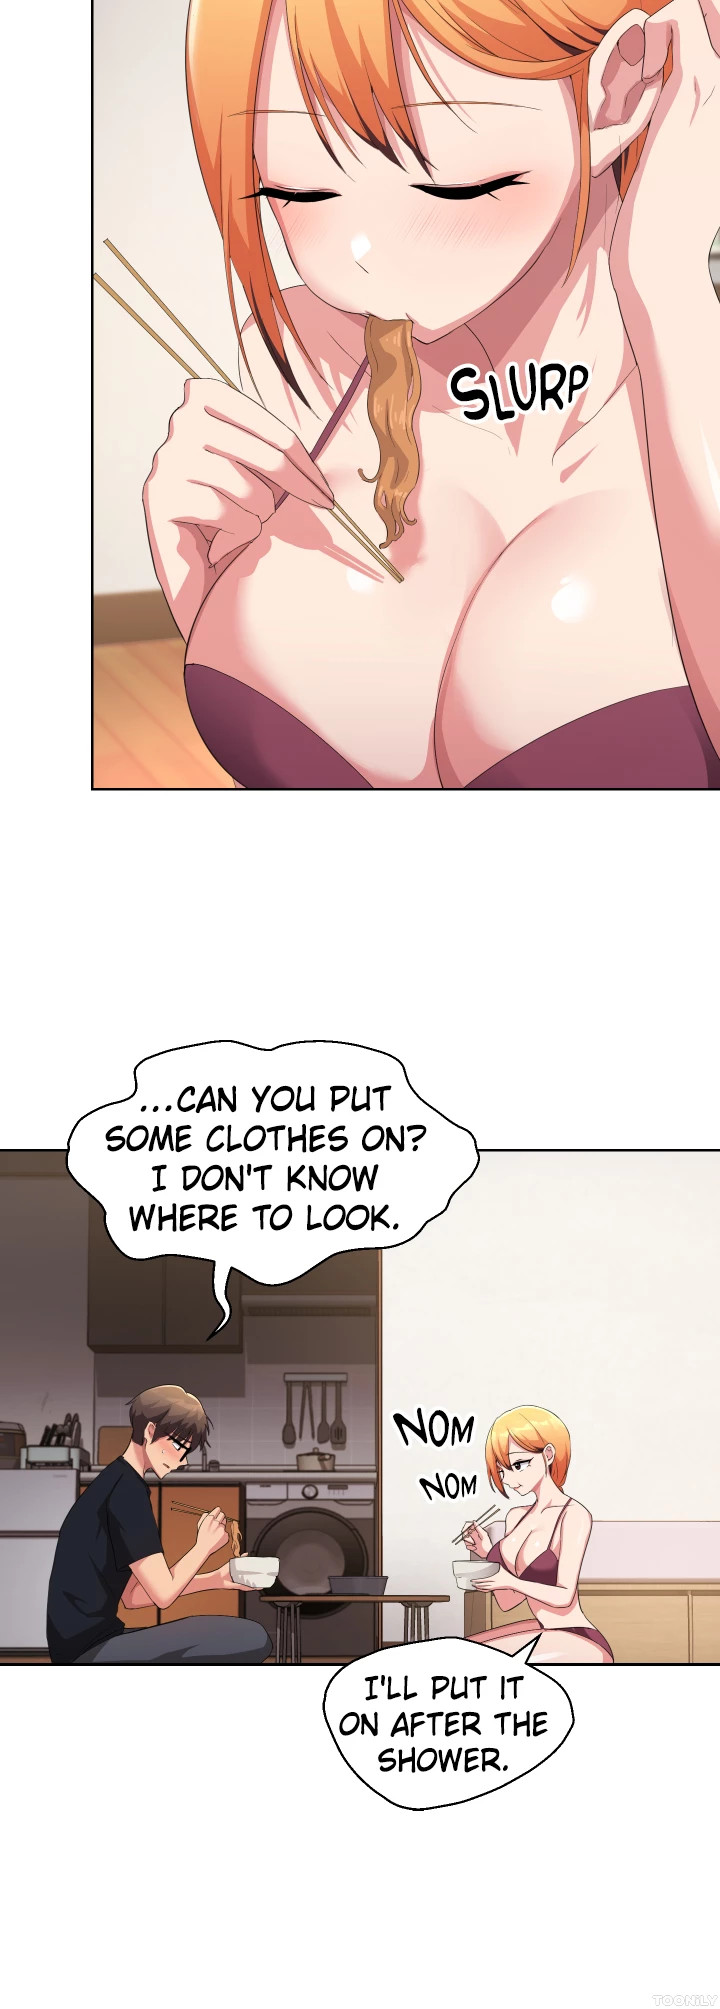 Girls I Used to Teach - Chapter 6 Page 4